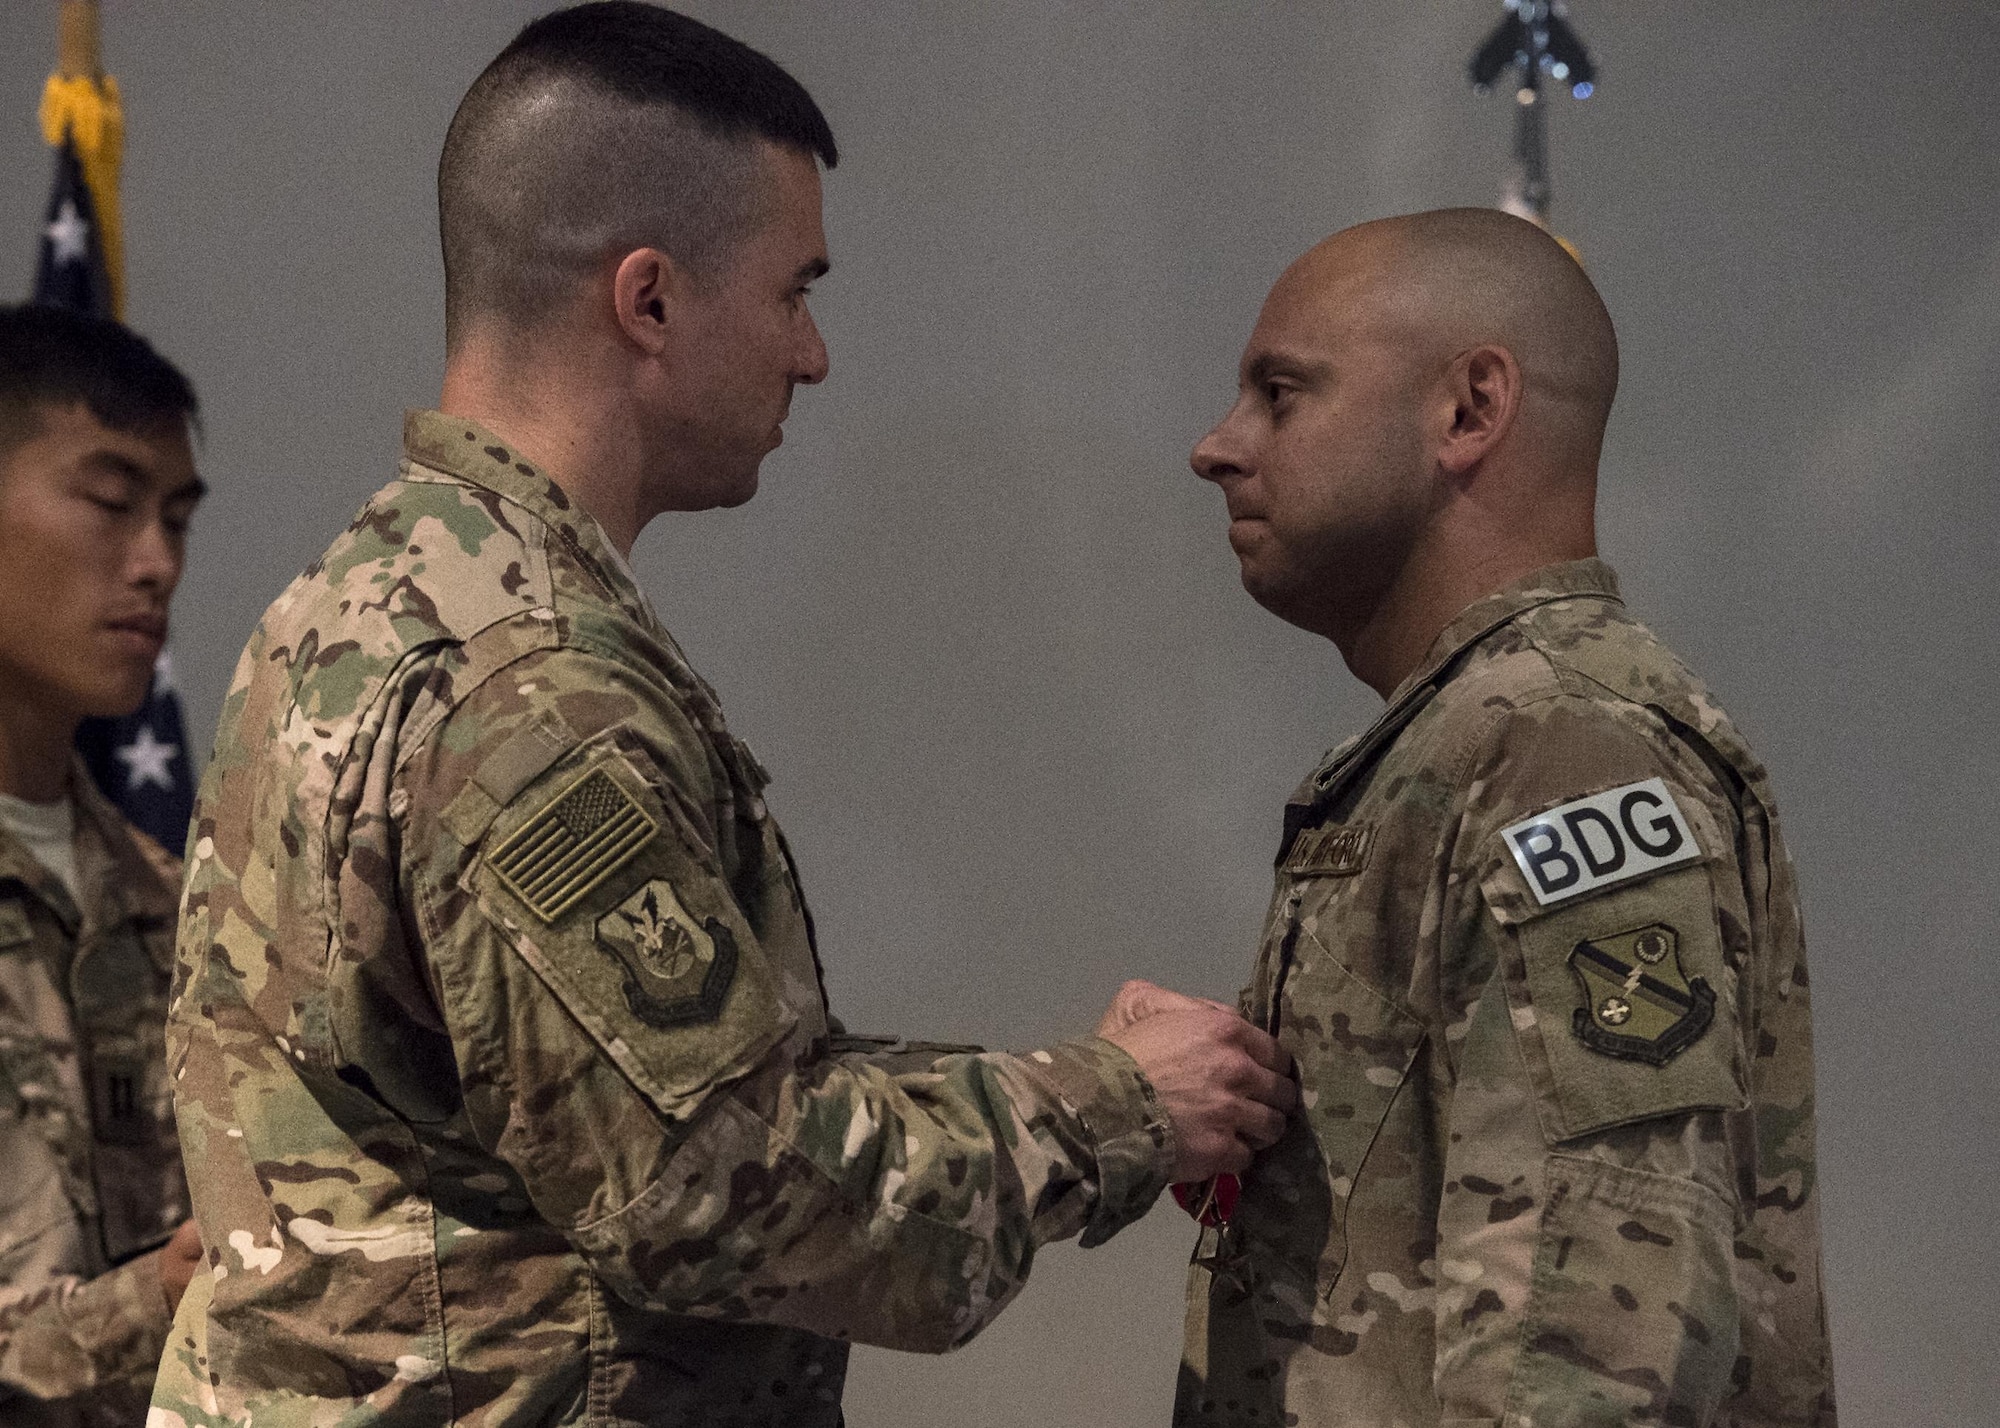 U.S. Air Force Col. Kevin Walker, left, 820th Base Defense Group commander, pins a Purple Heart medal on Master Sgt. Aaron Frederick, 93d Air Ground Operations Wing command chief executive assistant, July 8, 2016, at Moody Air Force Base, Ga. One of the medals Frederick received was the Bronze Star, which recognizes acts of heroism performed in ground combat and is annotated with a bronze “V”, which designates valor. (U.S. Air Force photo by Airman 1st Class Janiqua P. Robinson/Released)